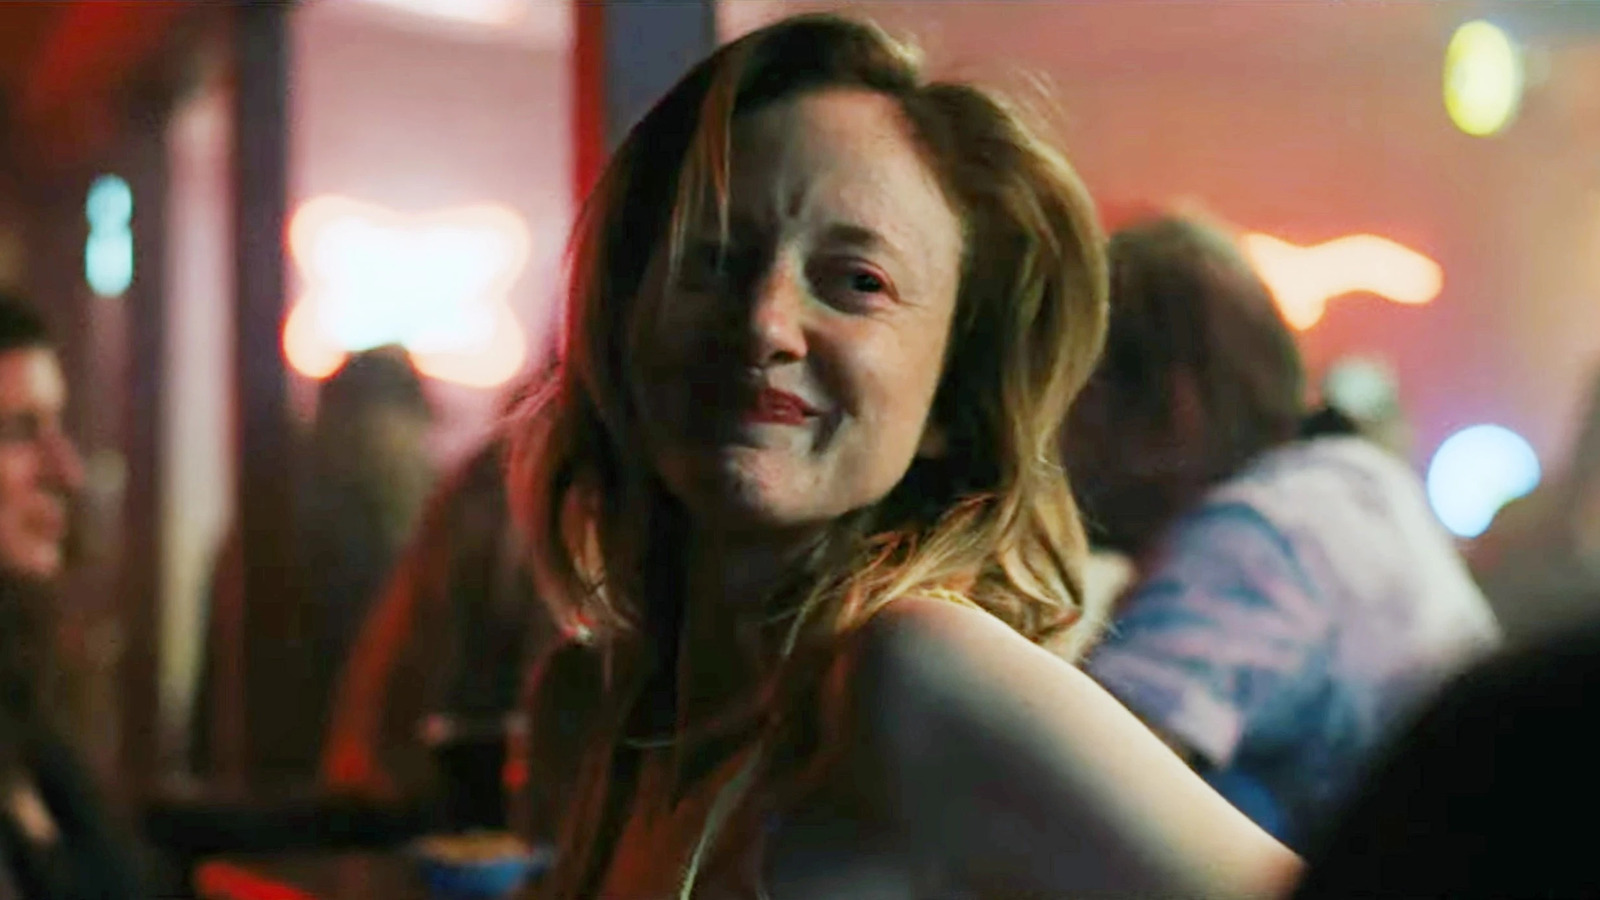 Andrea Riseborough's Oscar nomination for To Leslie will stand